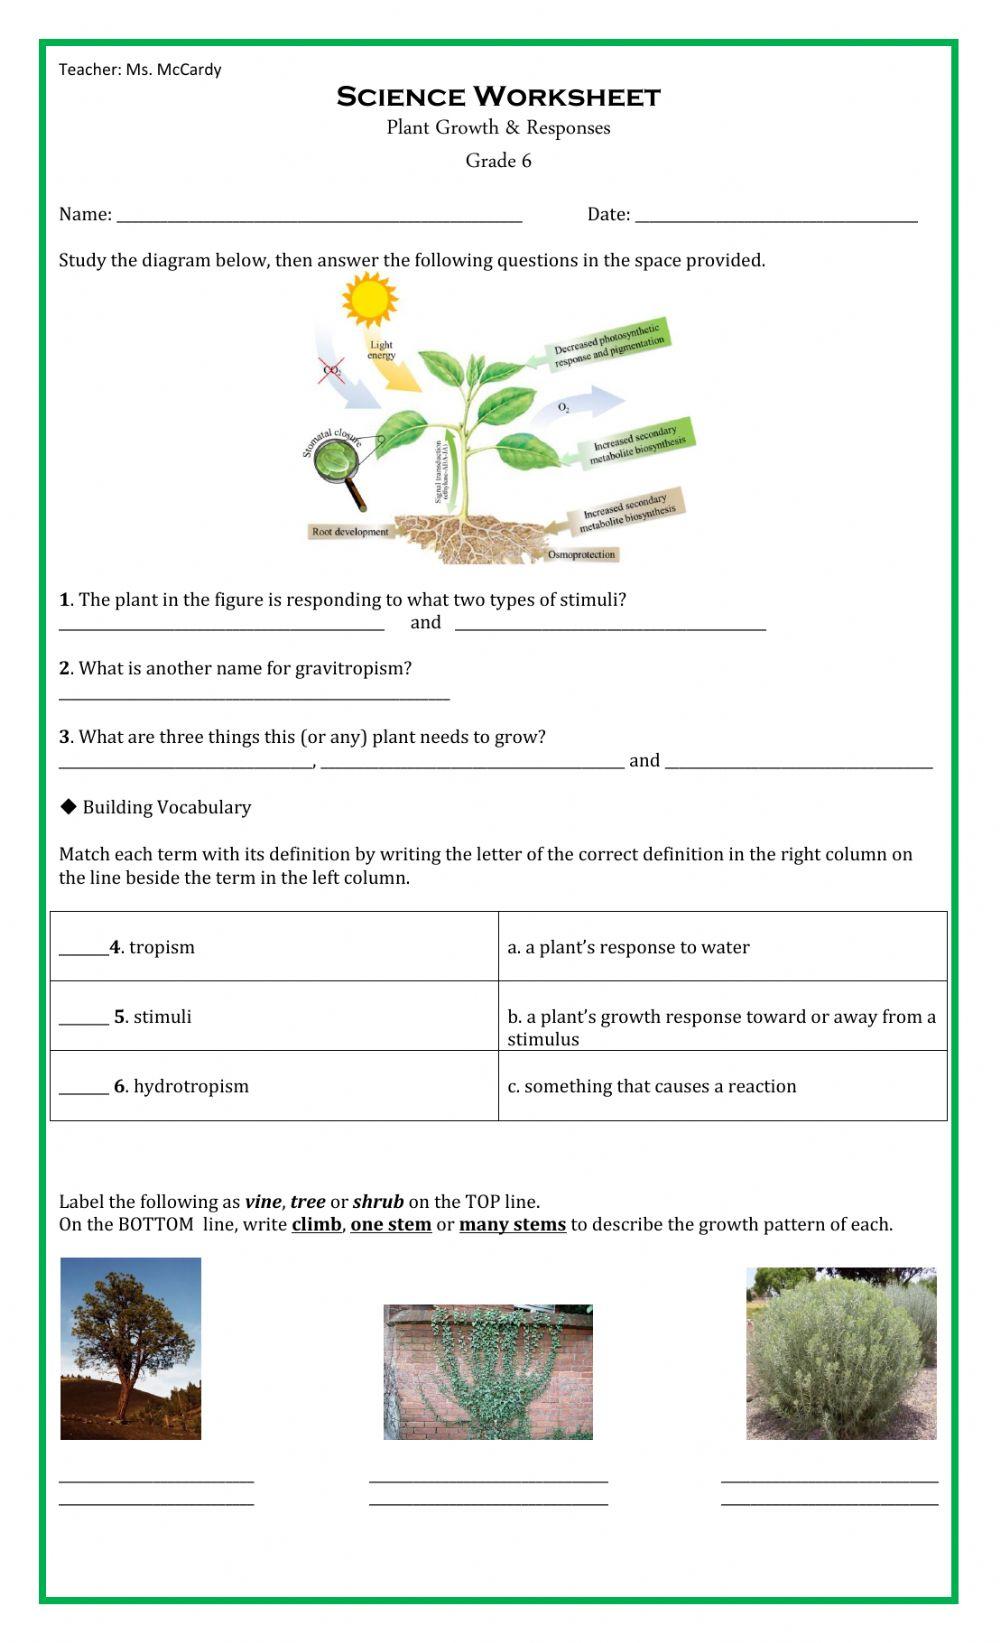 Plant Growth and Responses